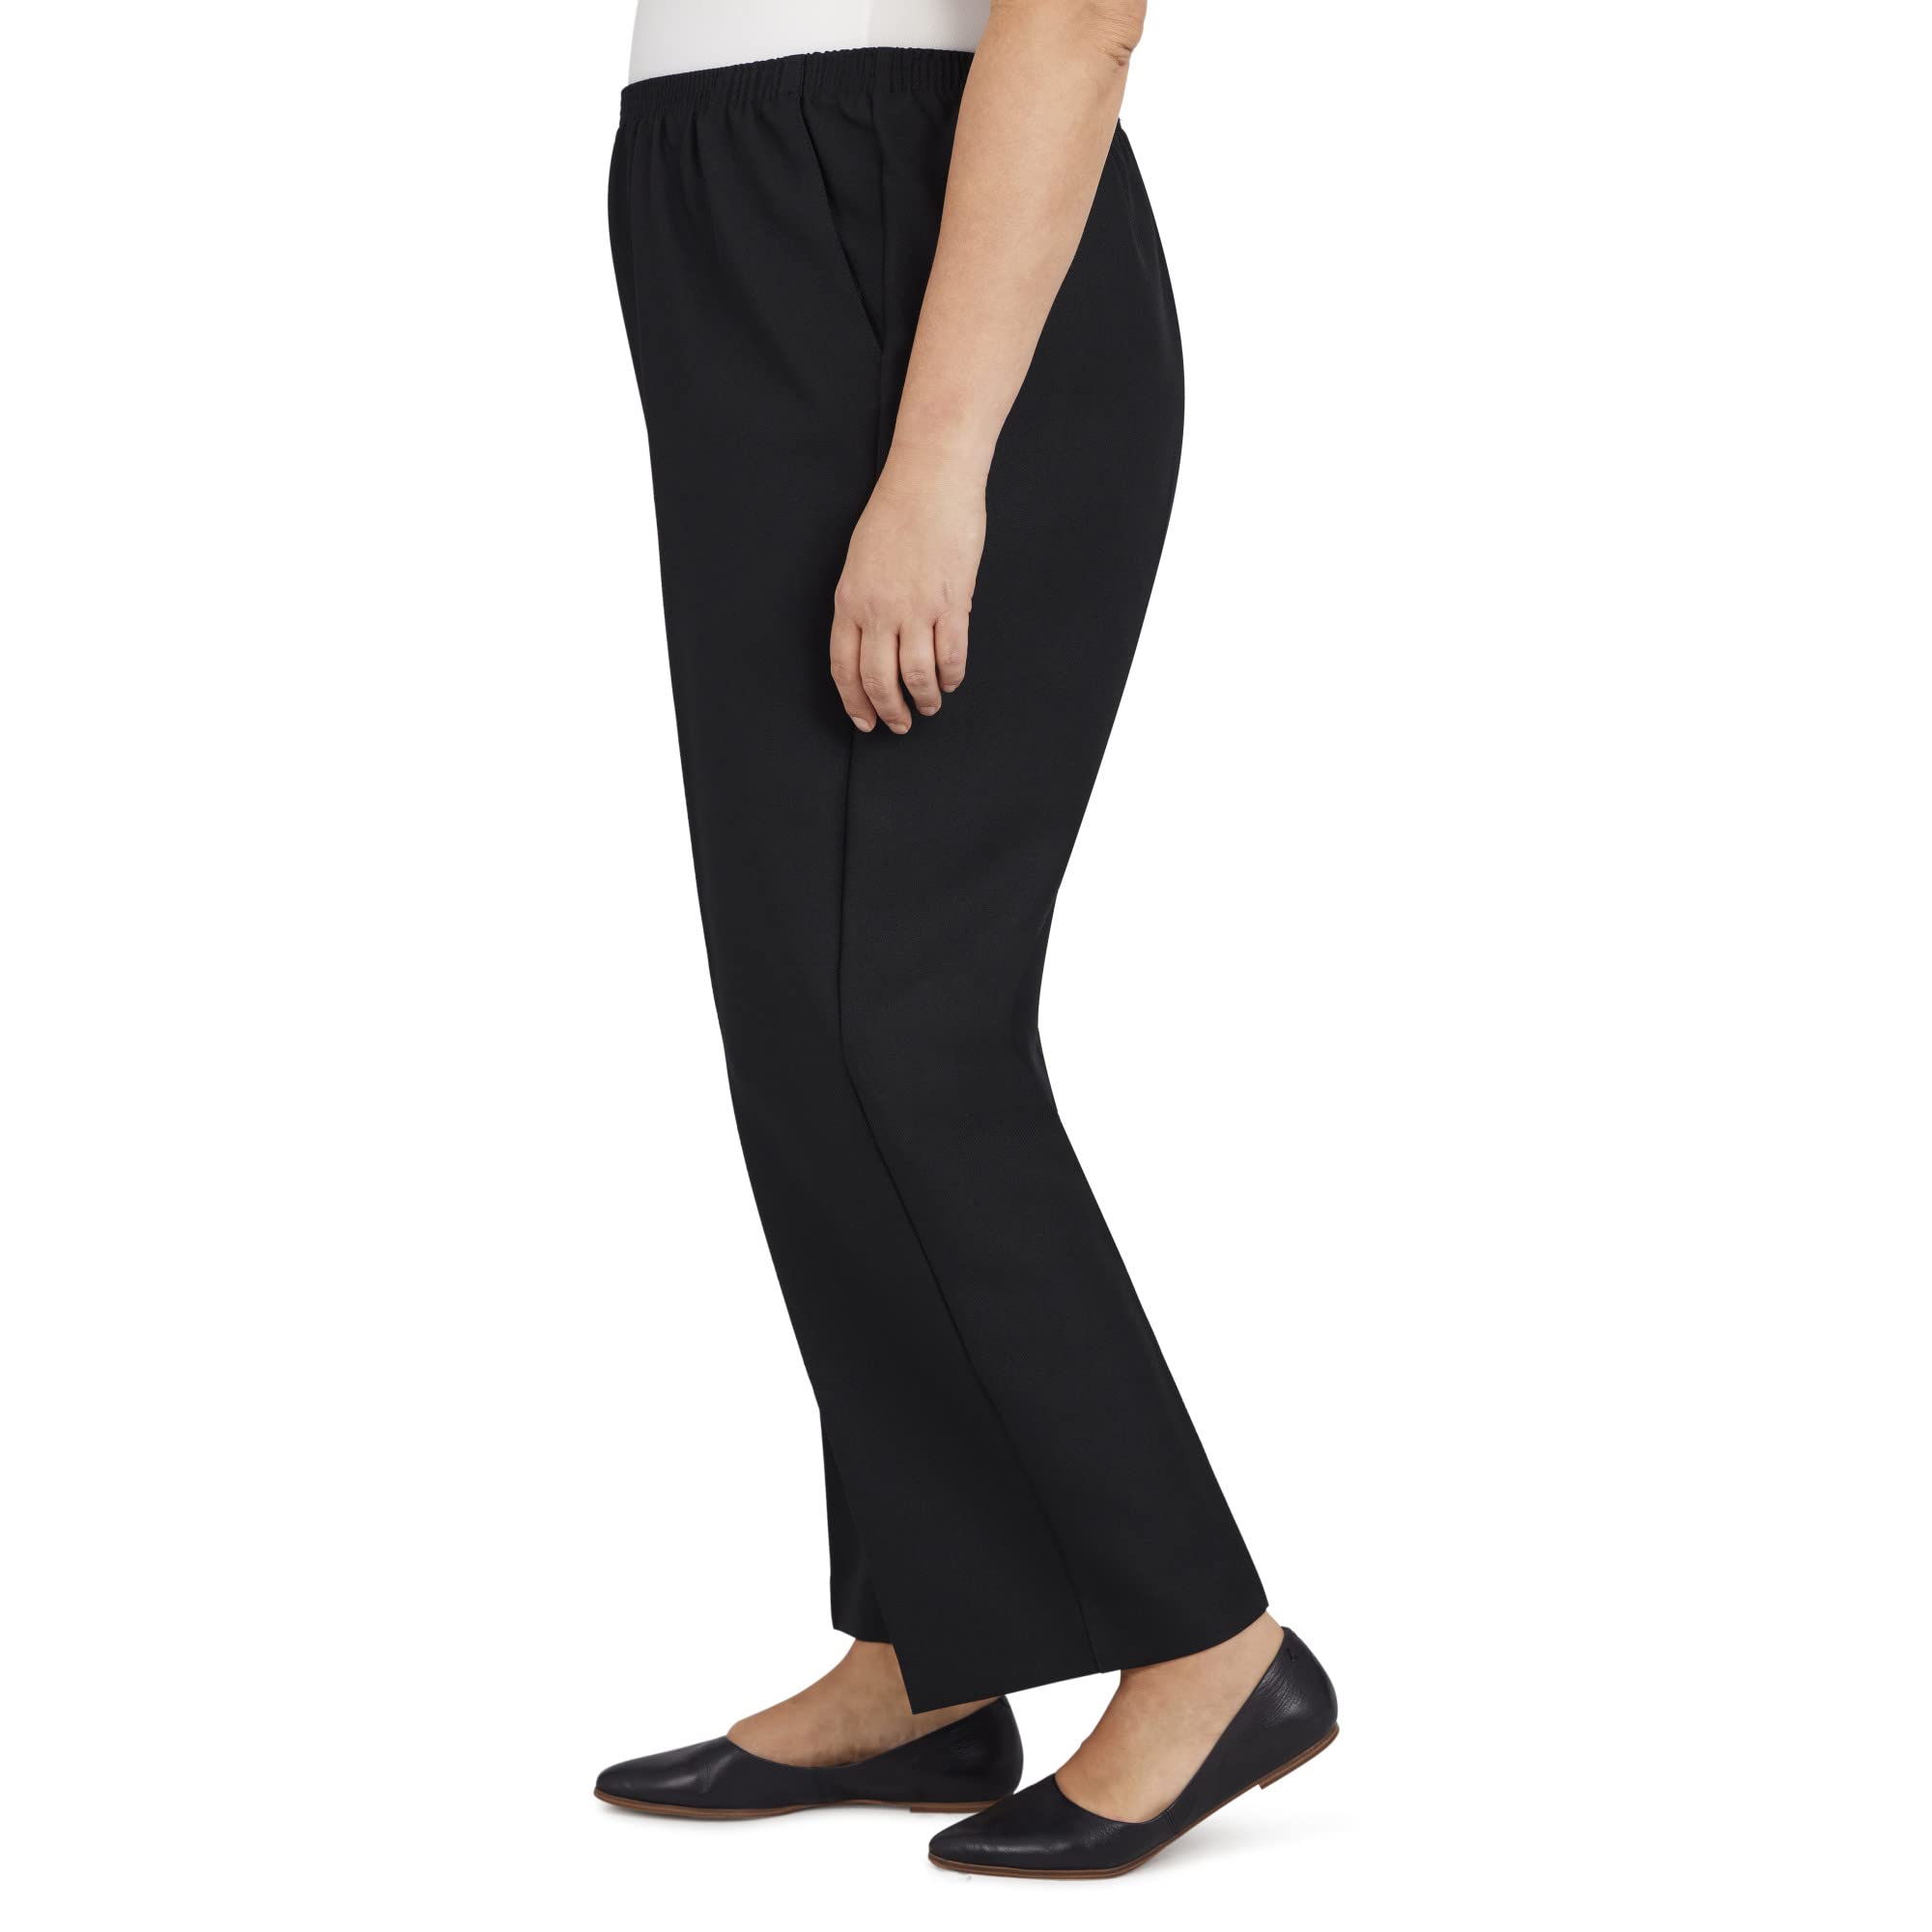 Alfred Dunner Women's Plus-Size Poly Proportioned Medium Pant